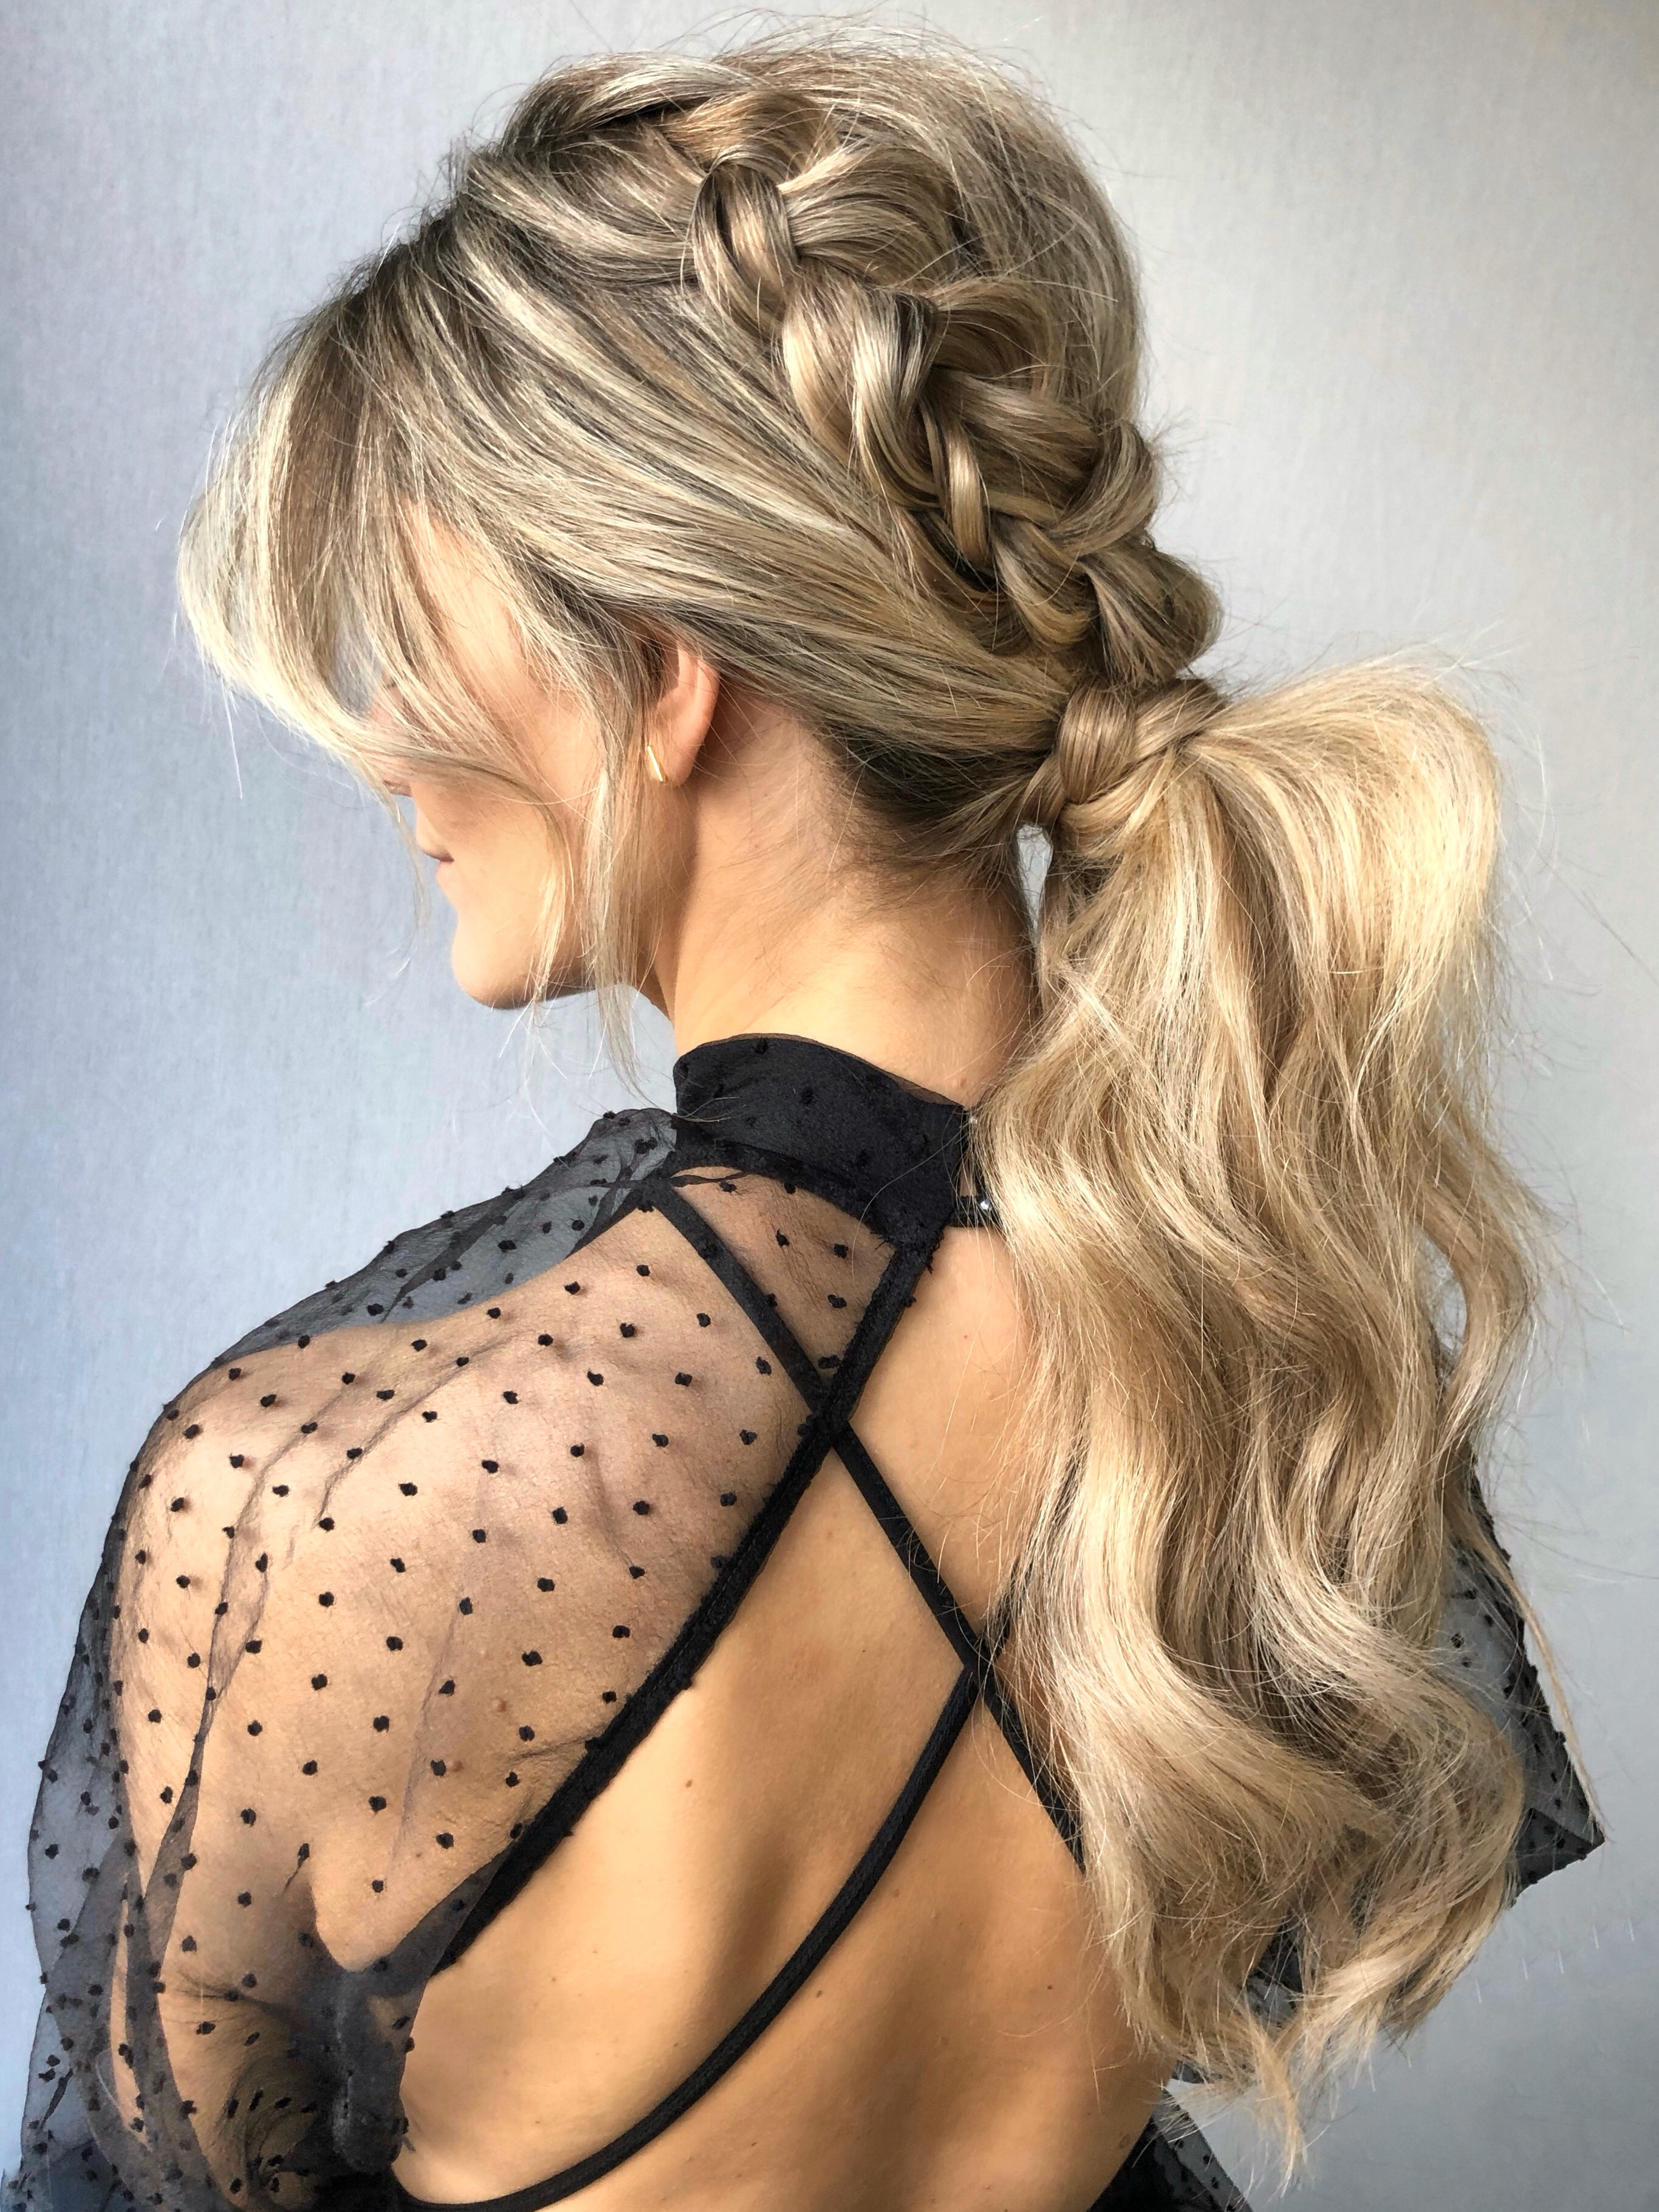 Loose Braids Going into a Ponytail